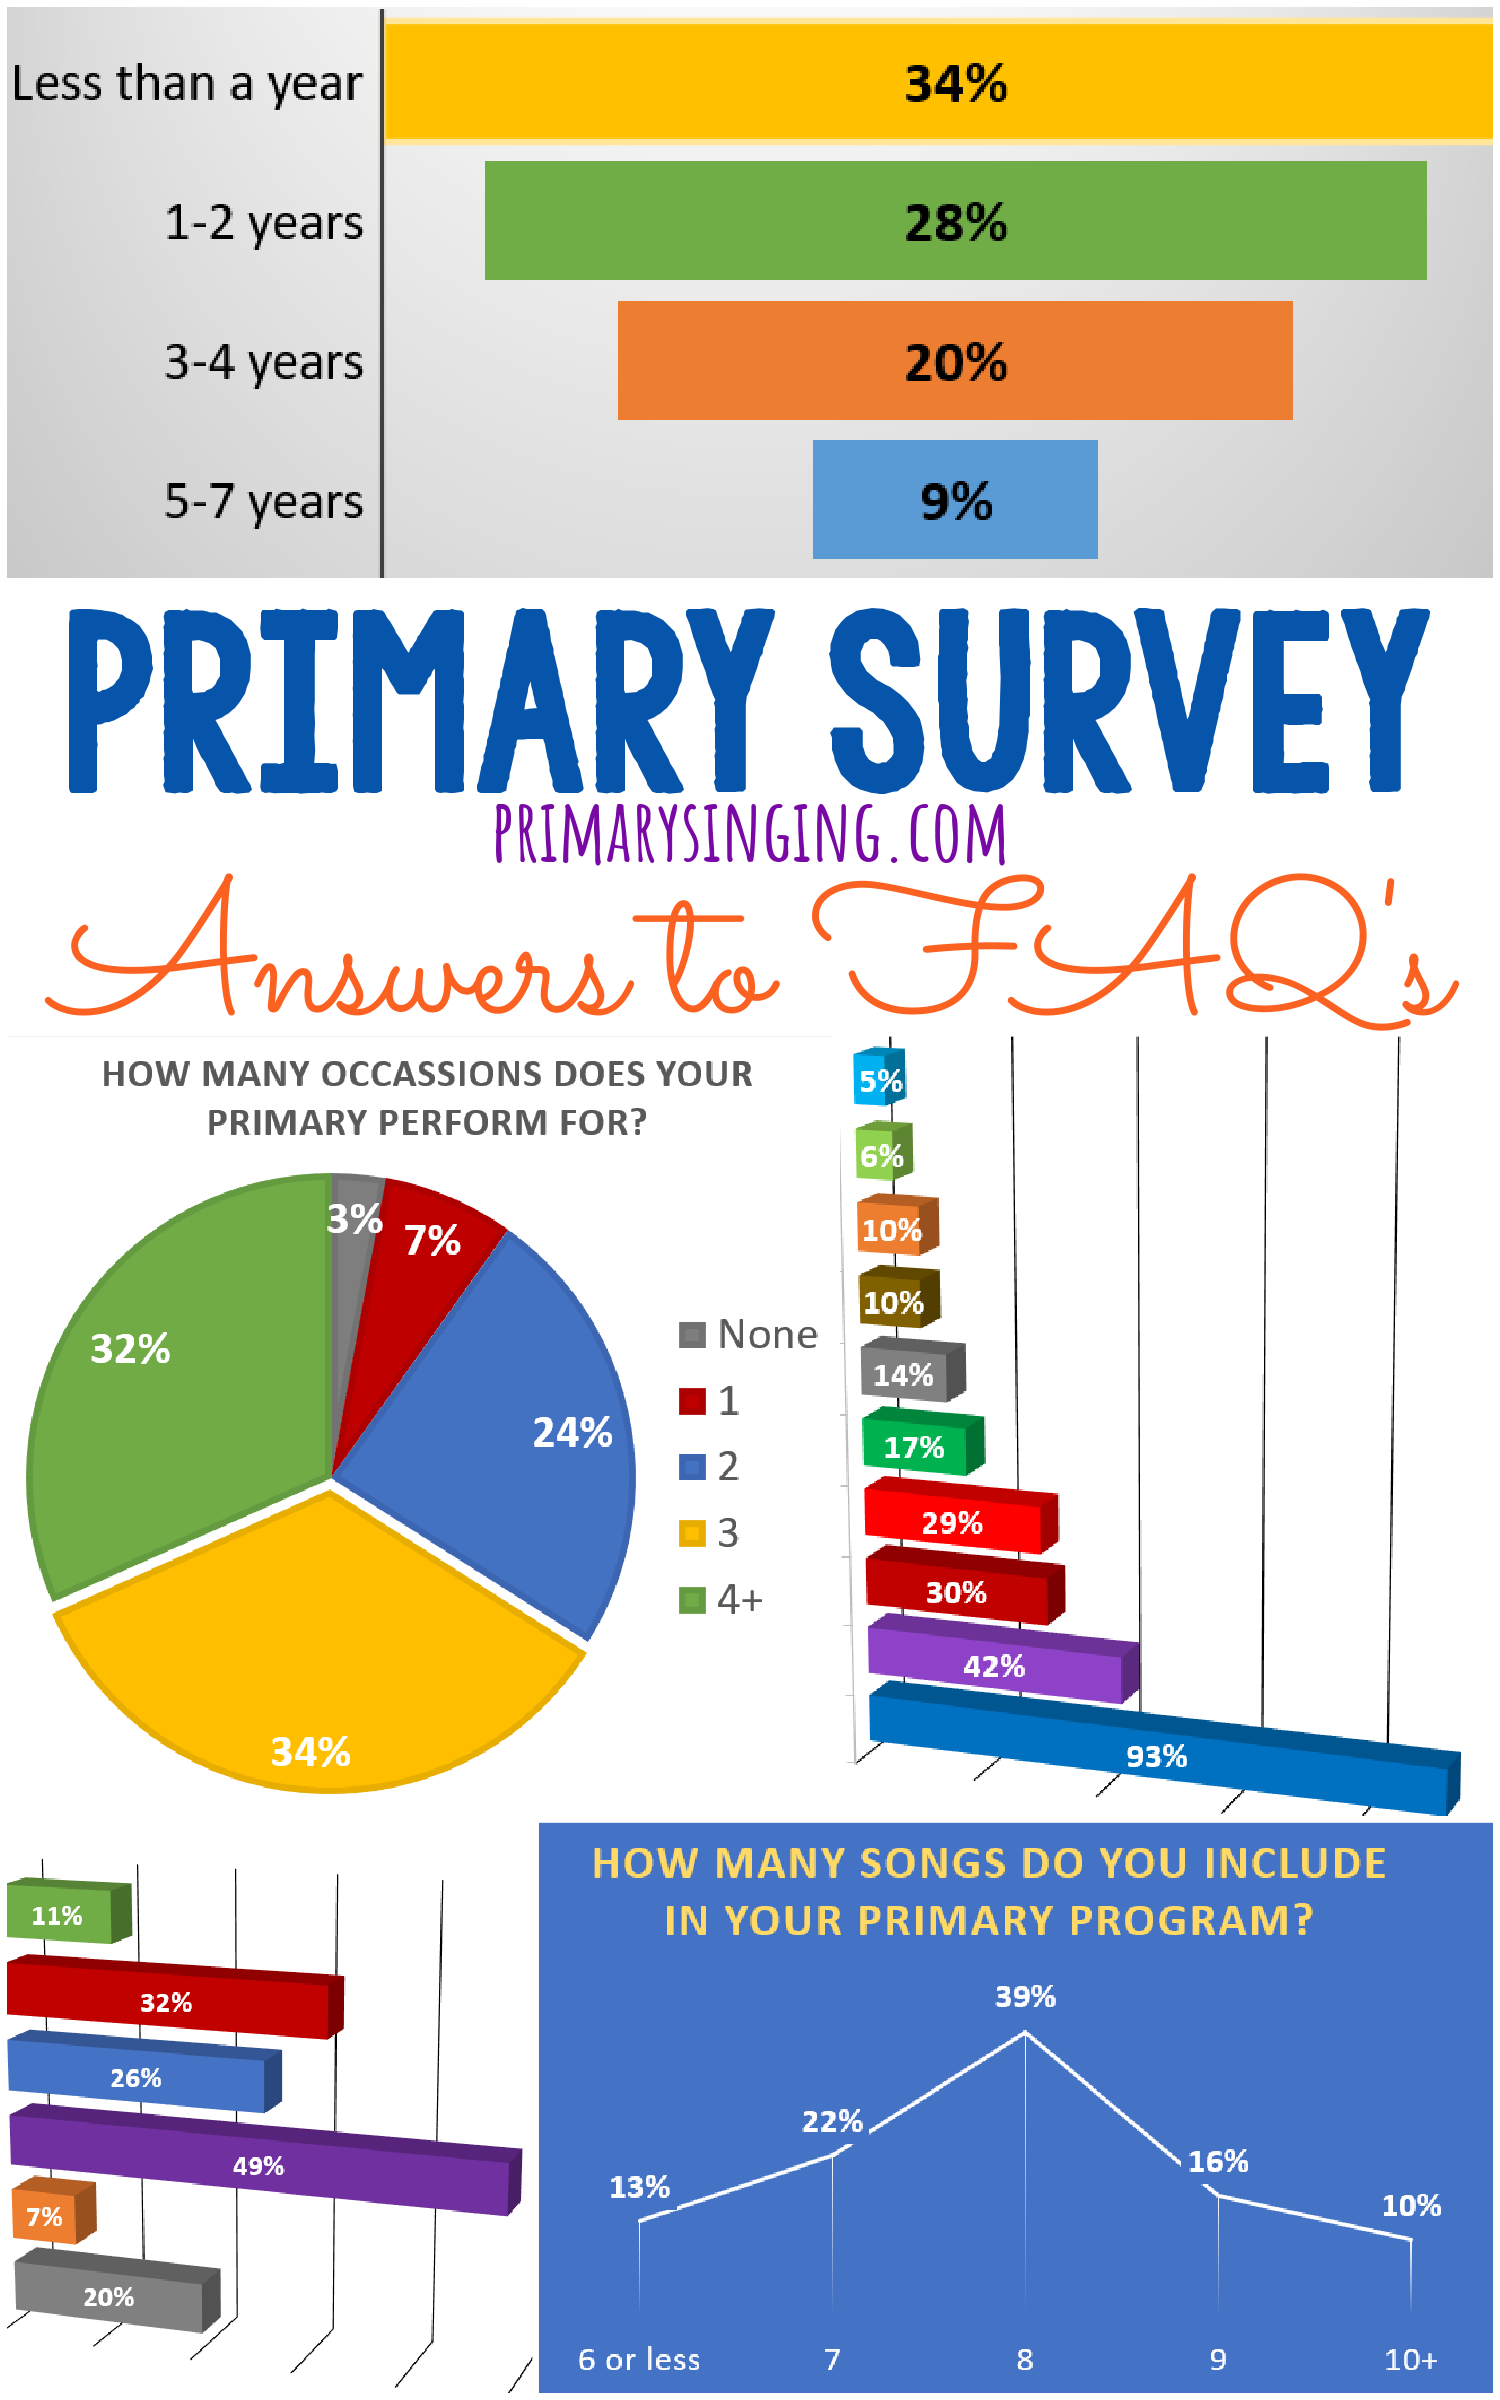 Answers to singing time questions and common Primary Music Leader FAQs! You'll love this fun post full of statistics including how long on average have you had the calling, how many songs to include in the Primary Program, which holidays does your Primary sing for, how big is your Primary budget and many more!